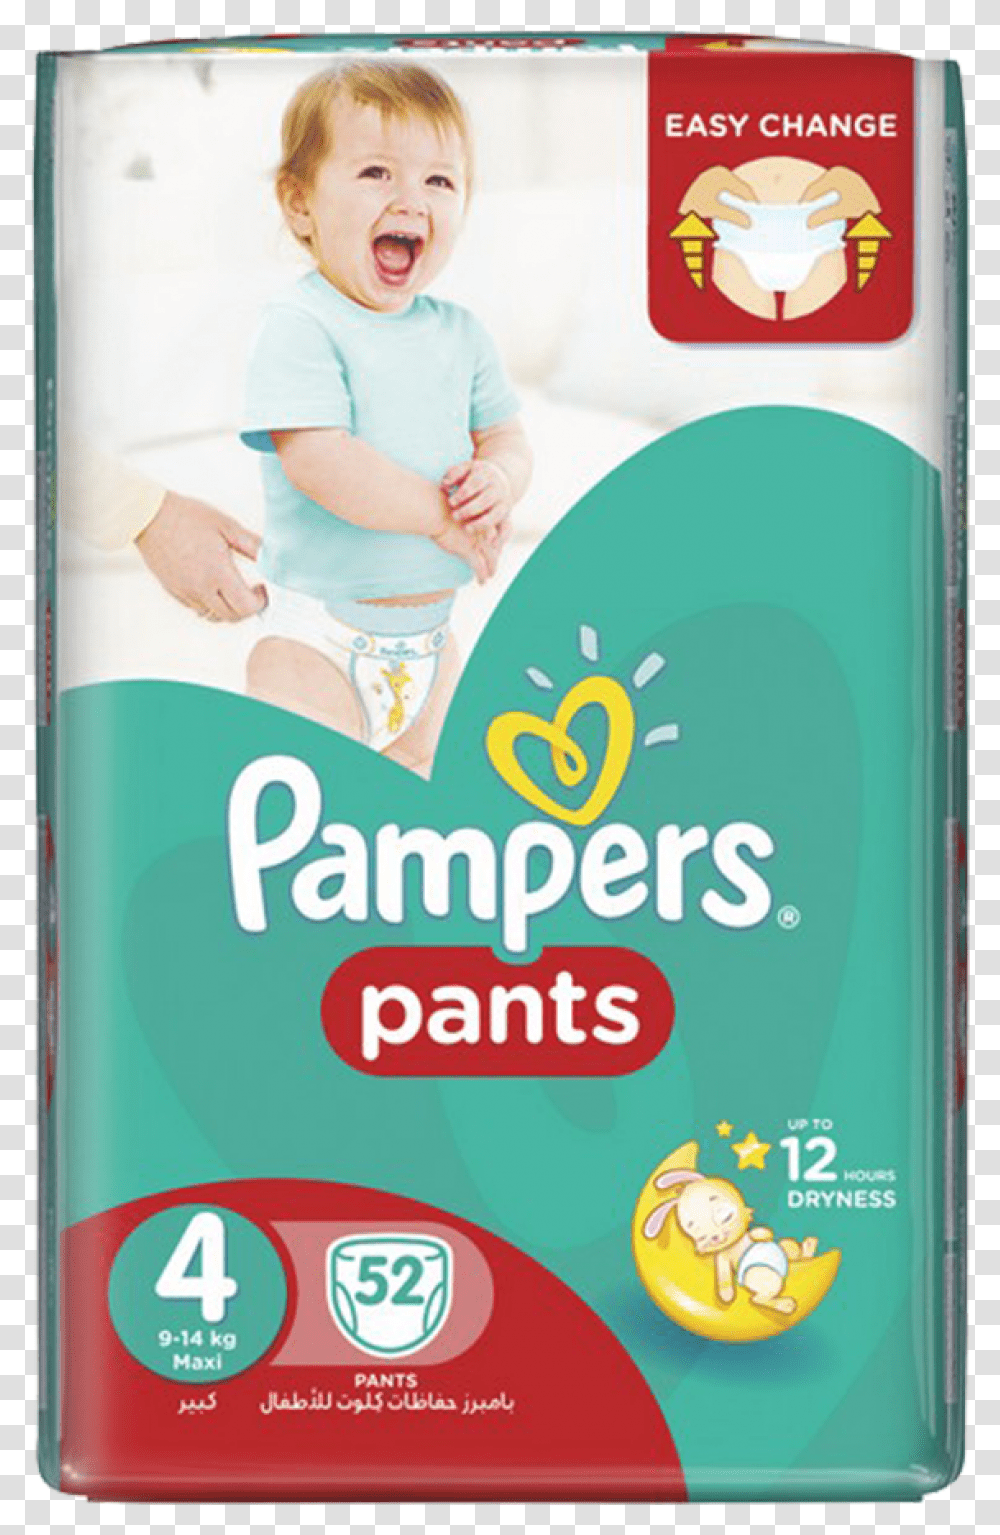 Pampers Pants Culottes 4 9 14kg Maxi 56pcs Pampers Pants Jumbo Pack Size, Person, Human, Advertisement, Poster Transparent Png